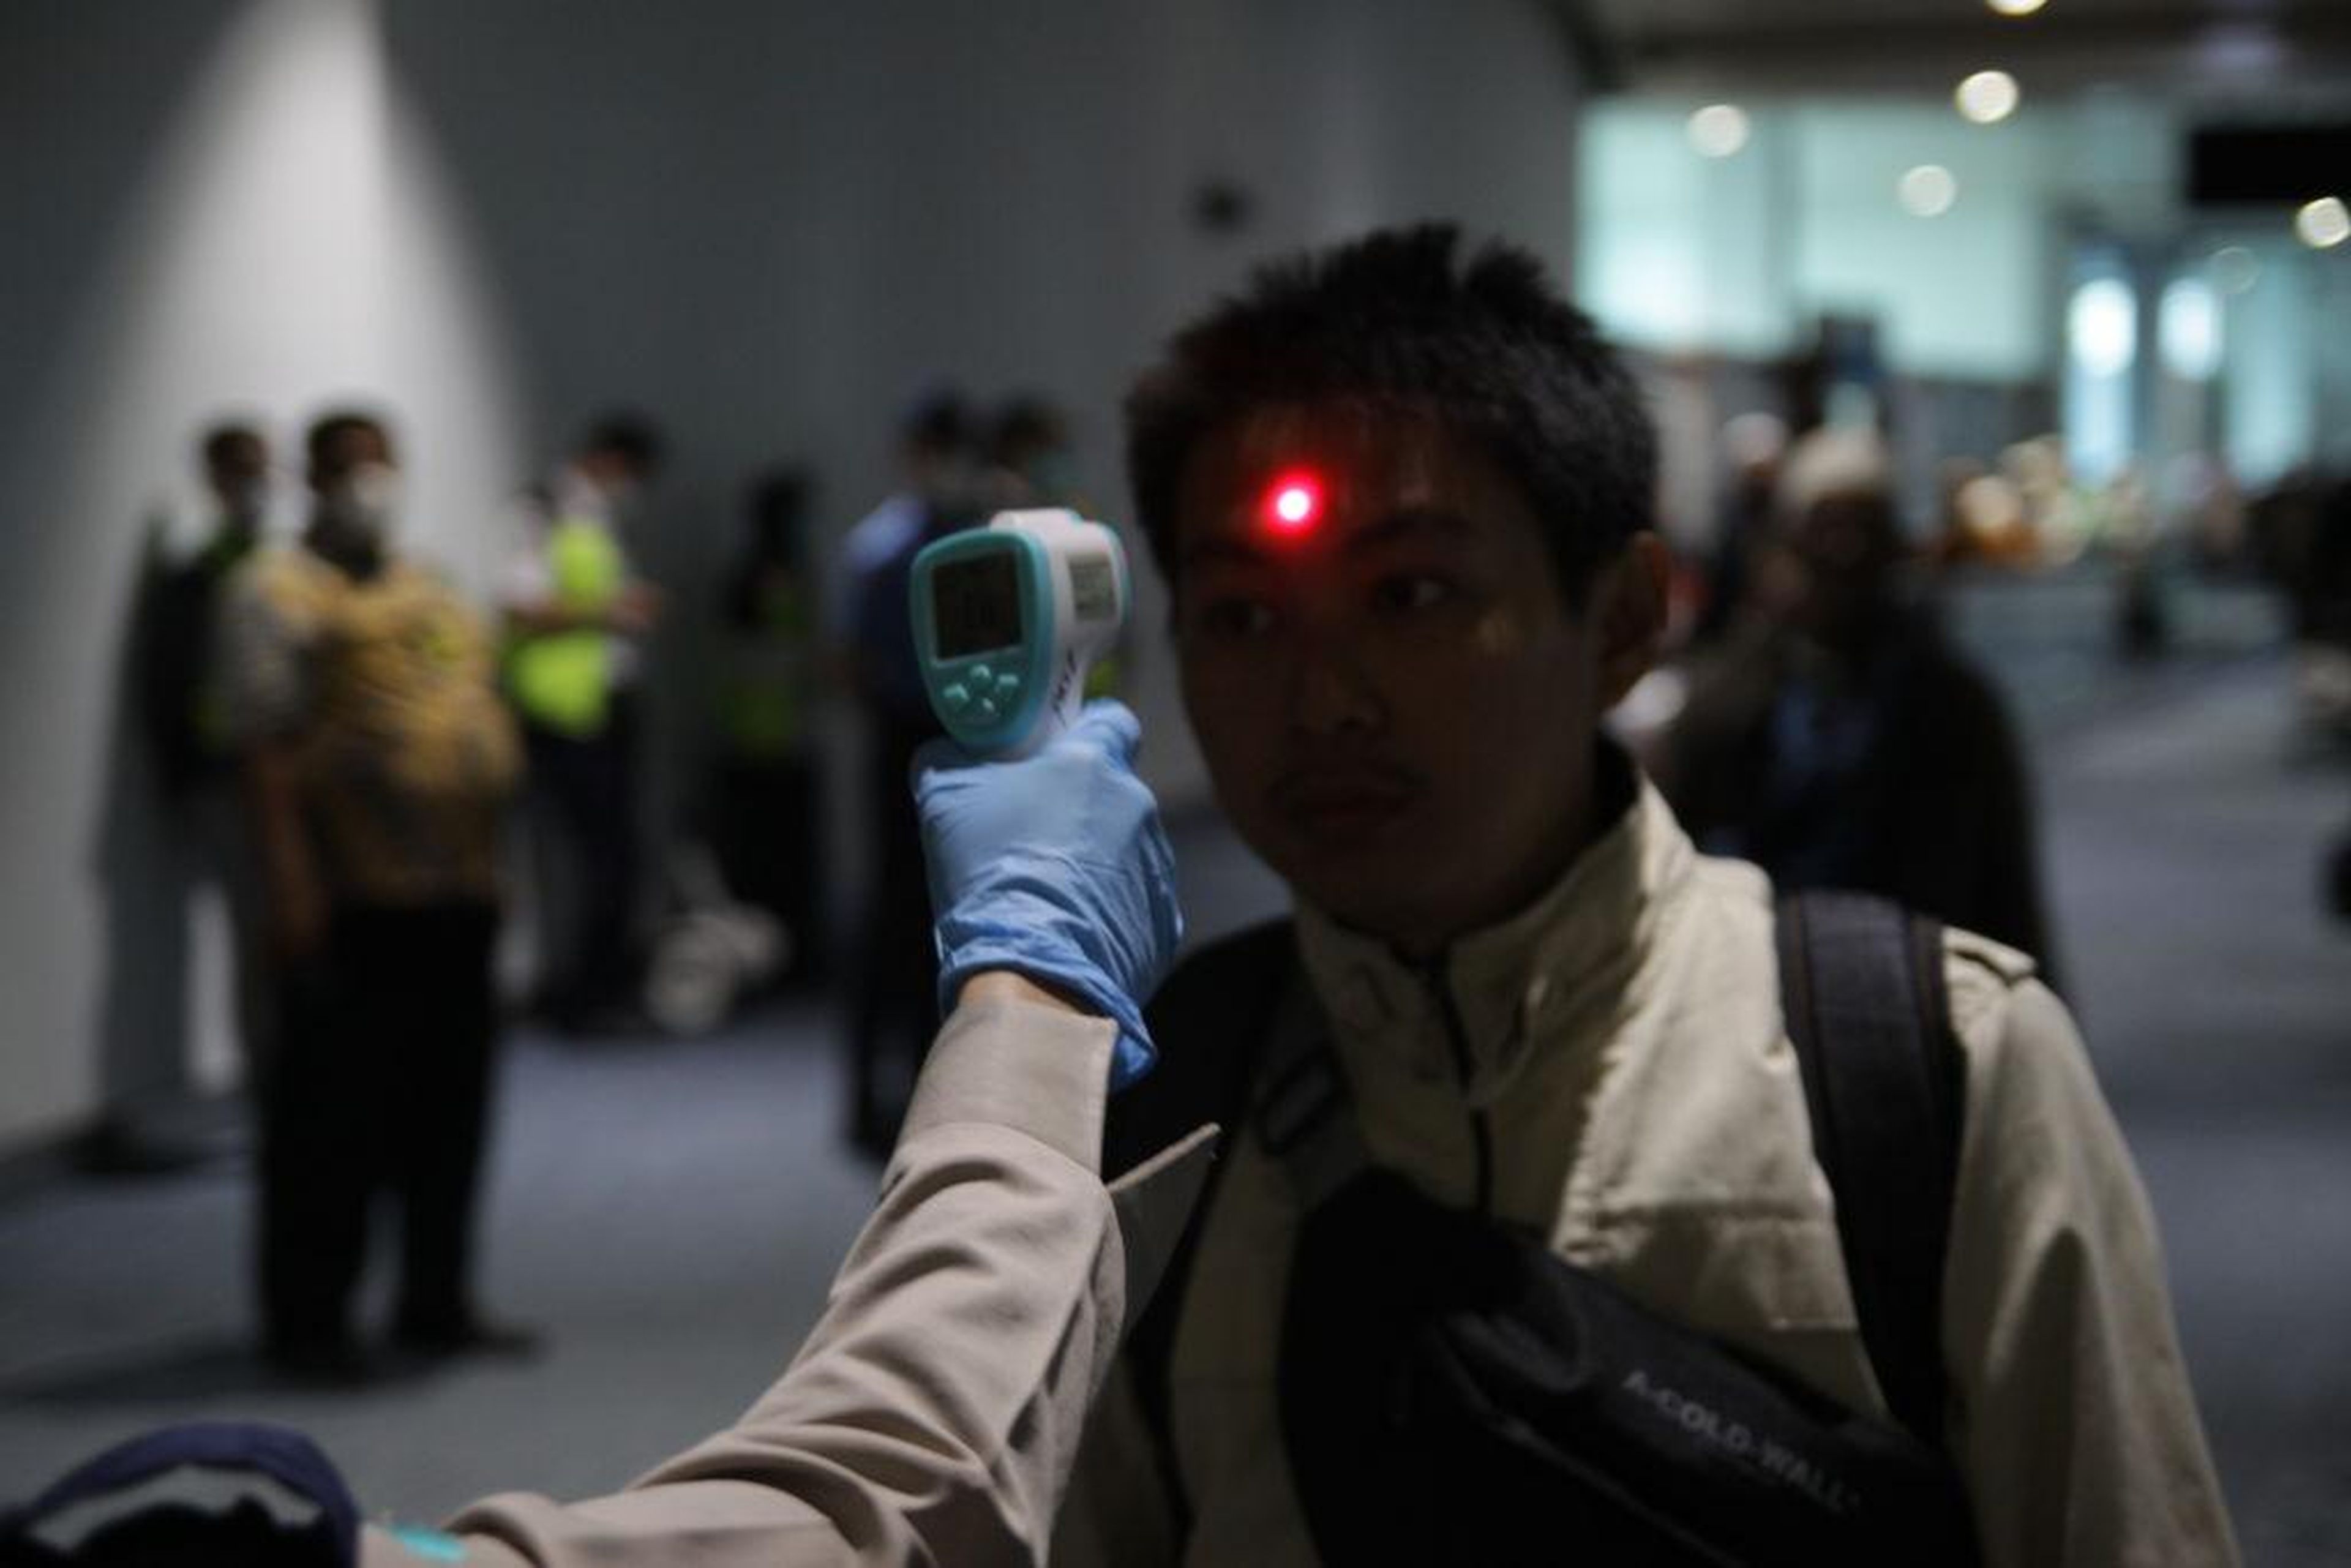 The Health Quarantine officers of Soekarno-Hatta International Airport carry out body temperature checks from abroad passengers at Soekarno-Hatta International Airport, Tangerang city.